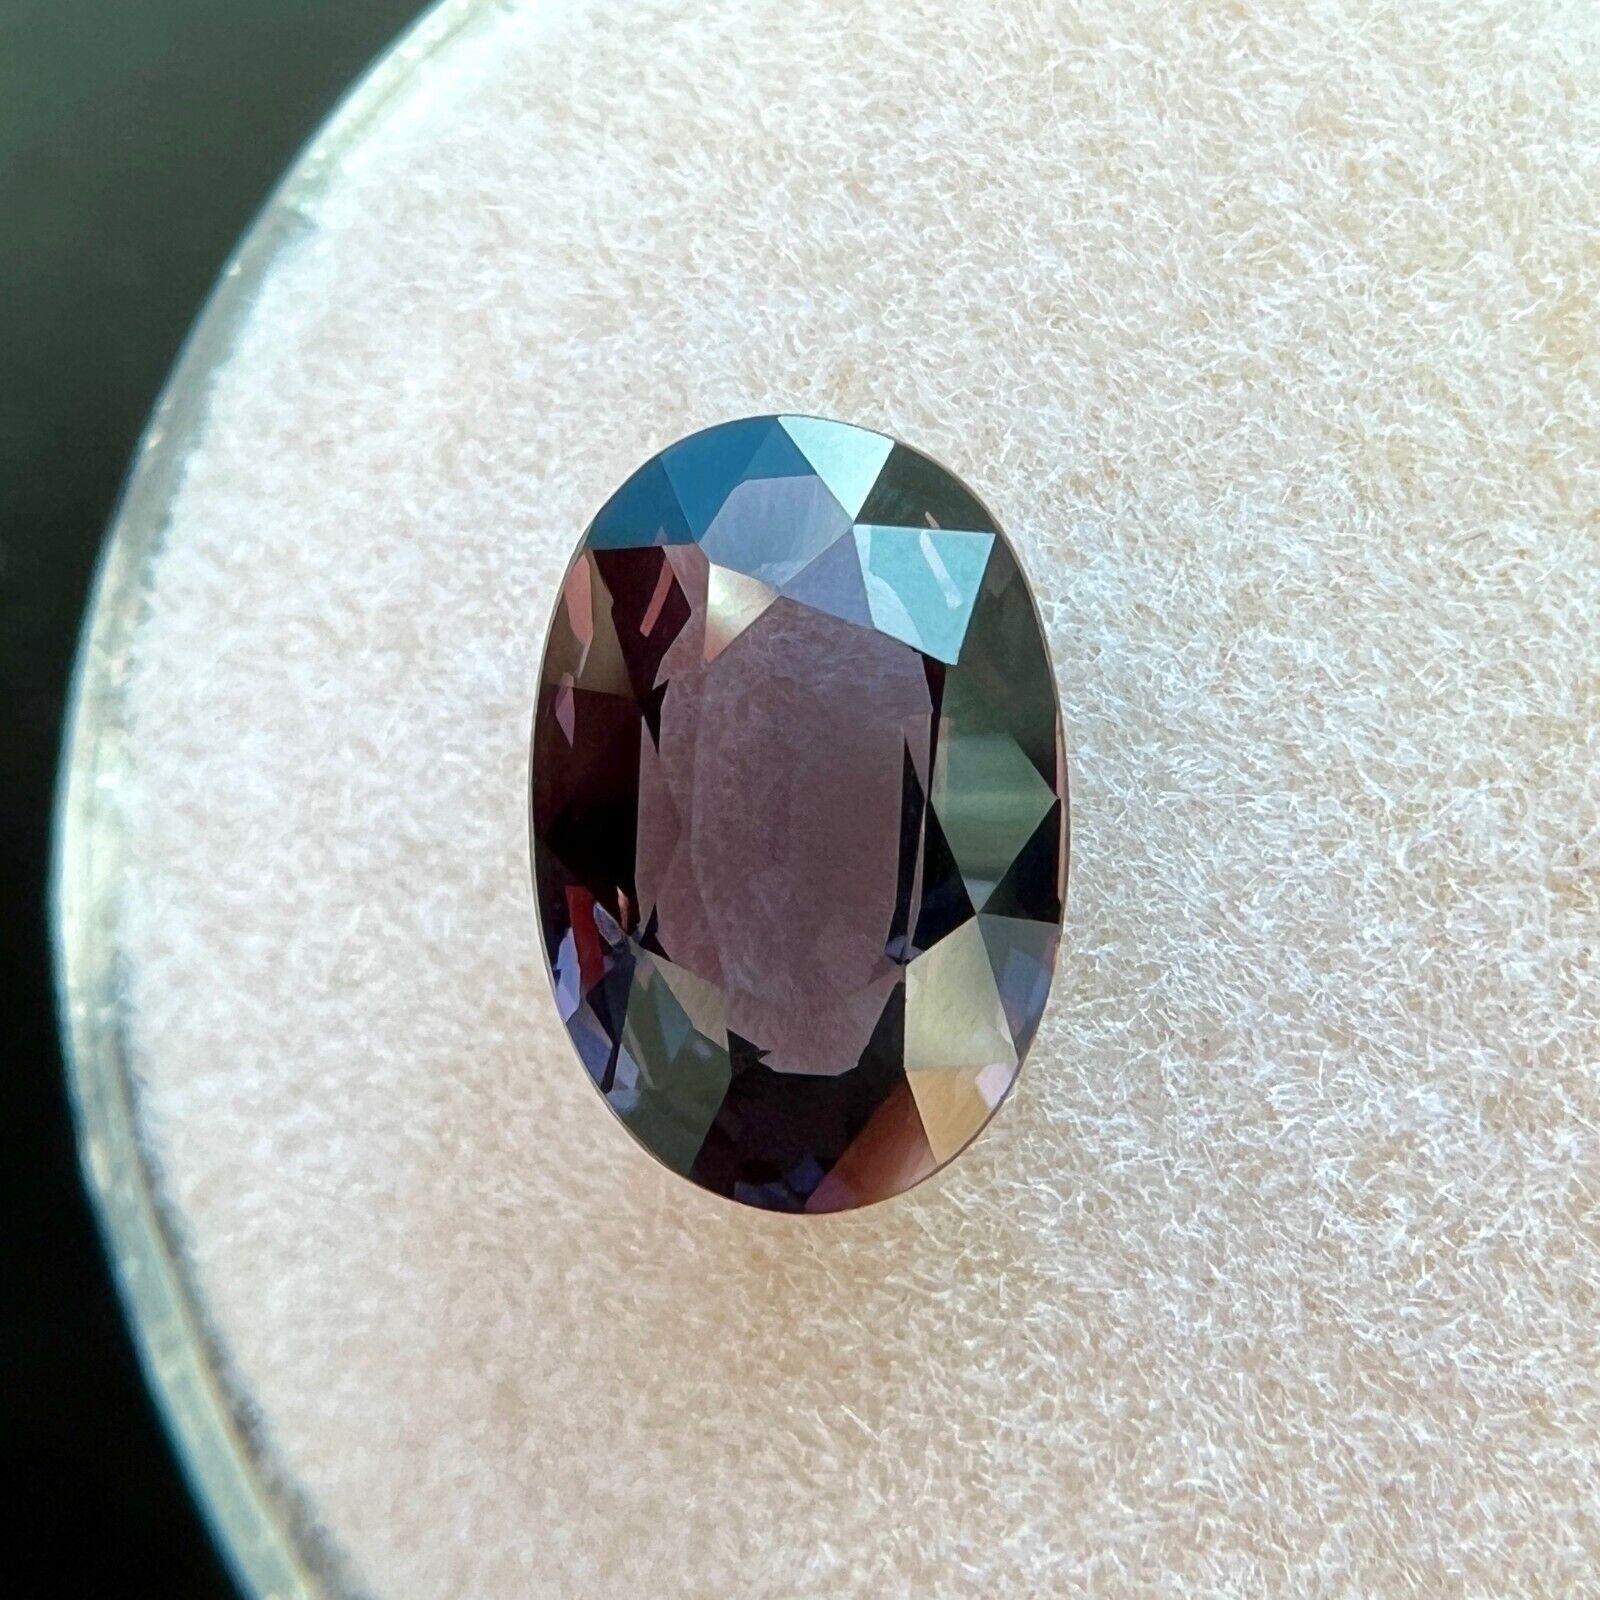 2.03ct Fine Deep Purple Spinel Natural Oval Cut 9.5x6.5mm Loose Rare Gem VS

Natural Deep Purple Spinel Gemstone.
Beautiful 2.03 Carat spinel with a deep purple colour. This spinel also has very good clarity, VS.
A clean stone with a very good oval